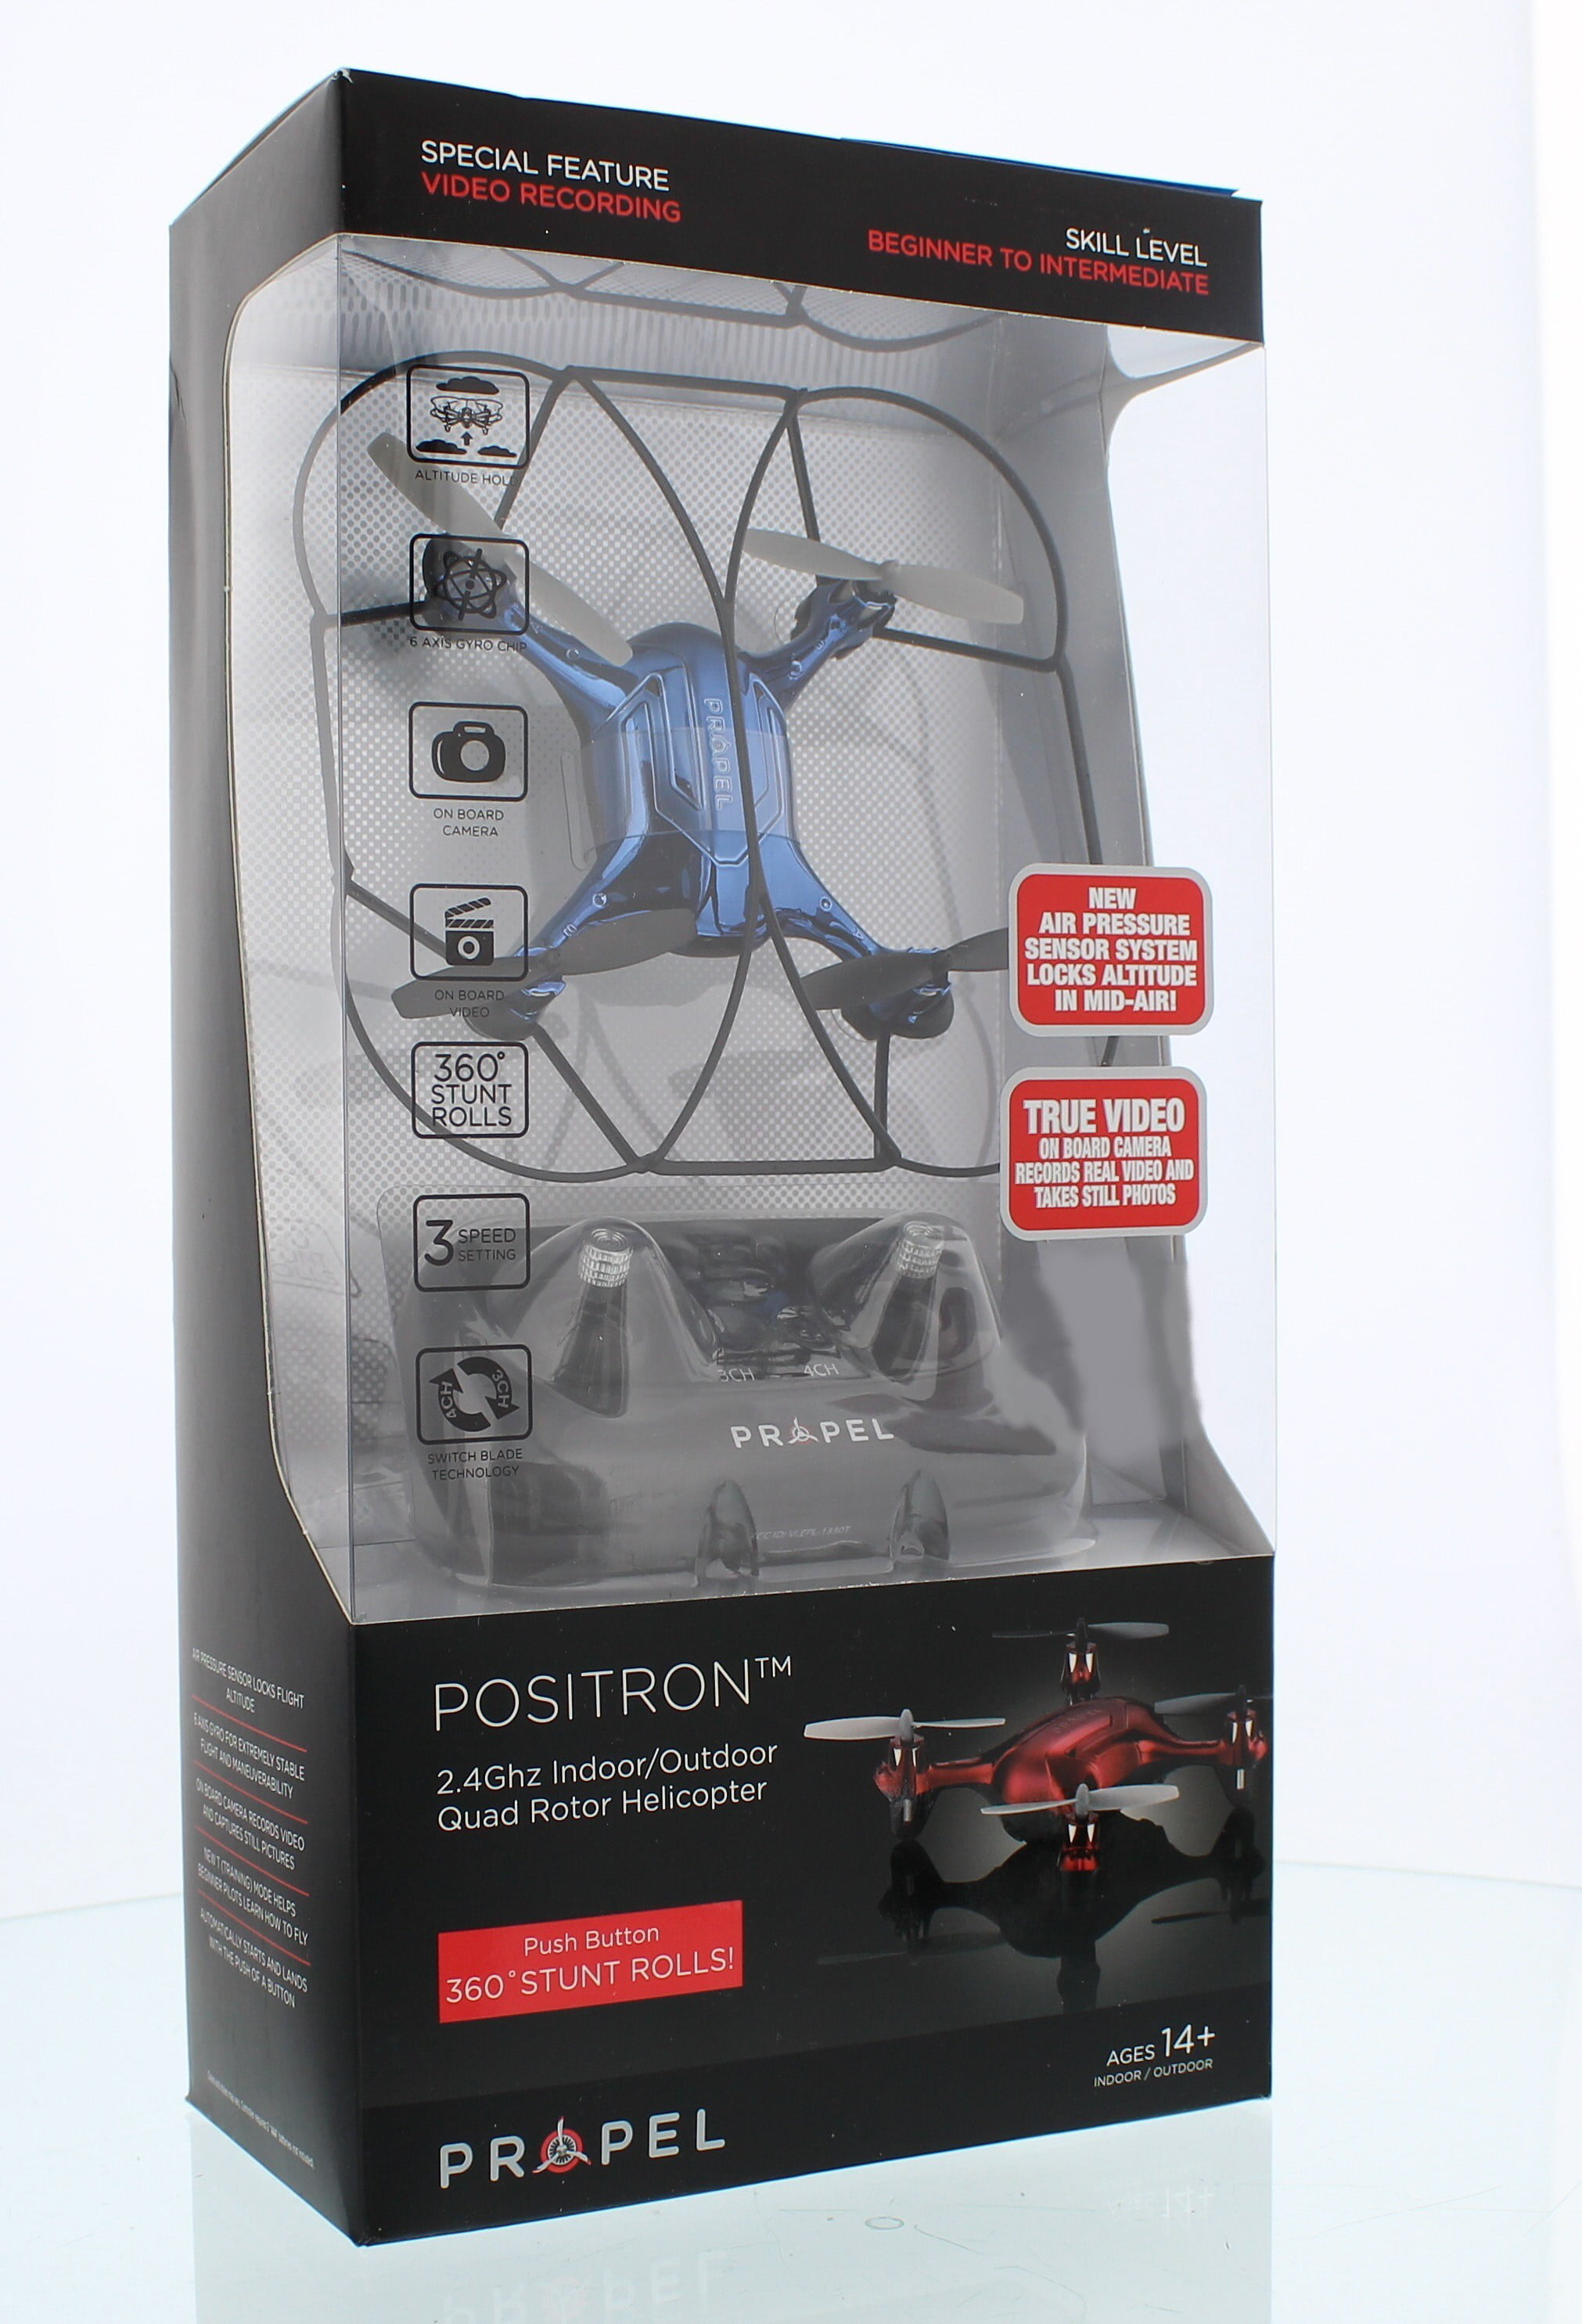 Drone Propel Positron 2.4Ghz Quad Rotor Helicopter Camera Drone Black 